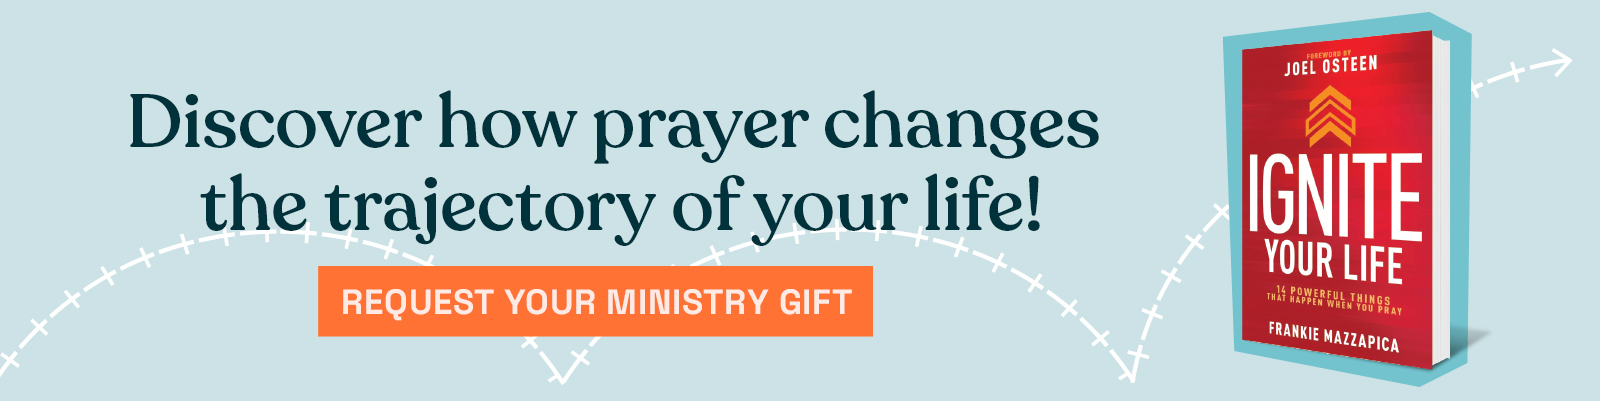 Discover how prayer changes things